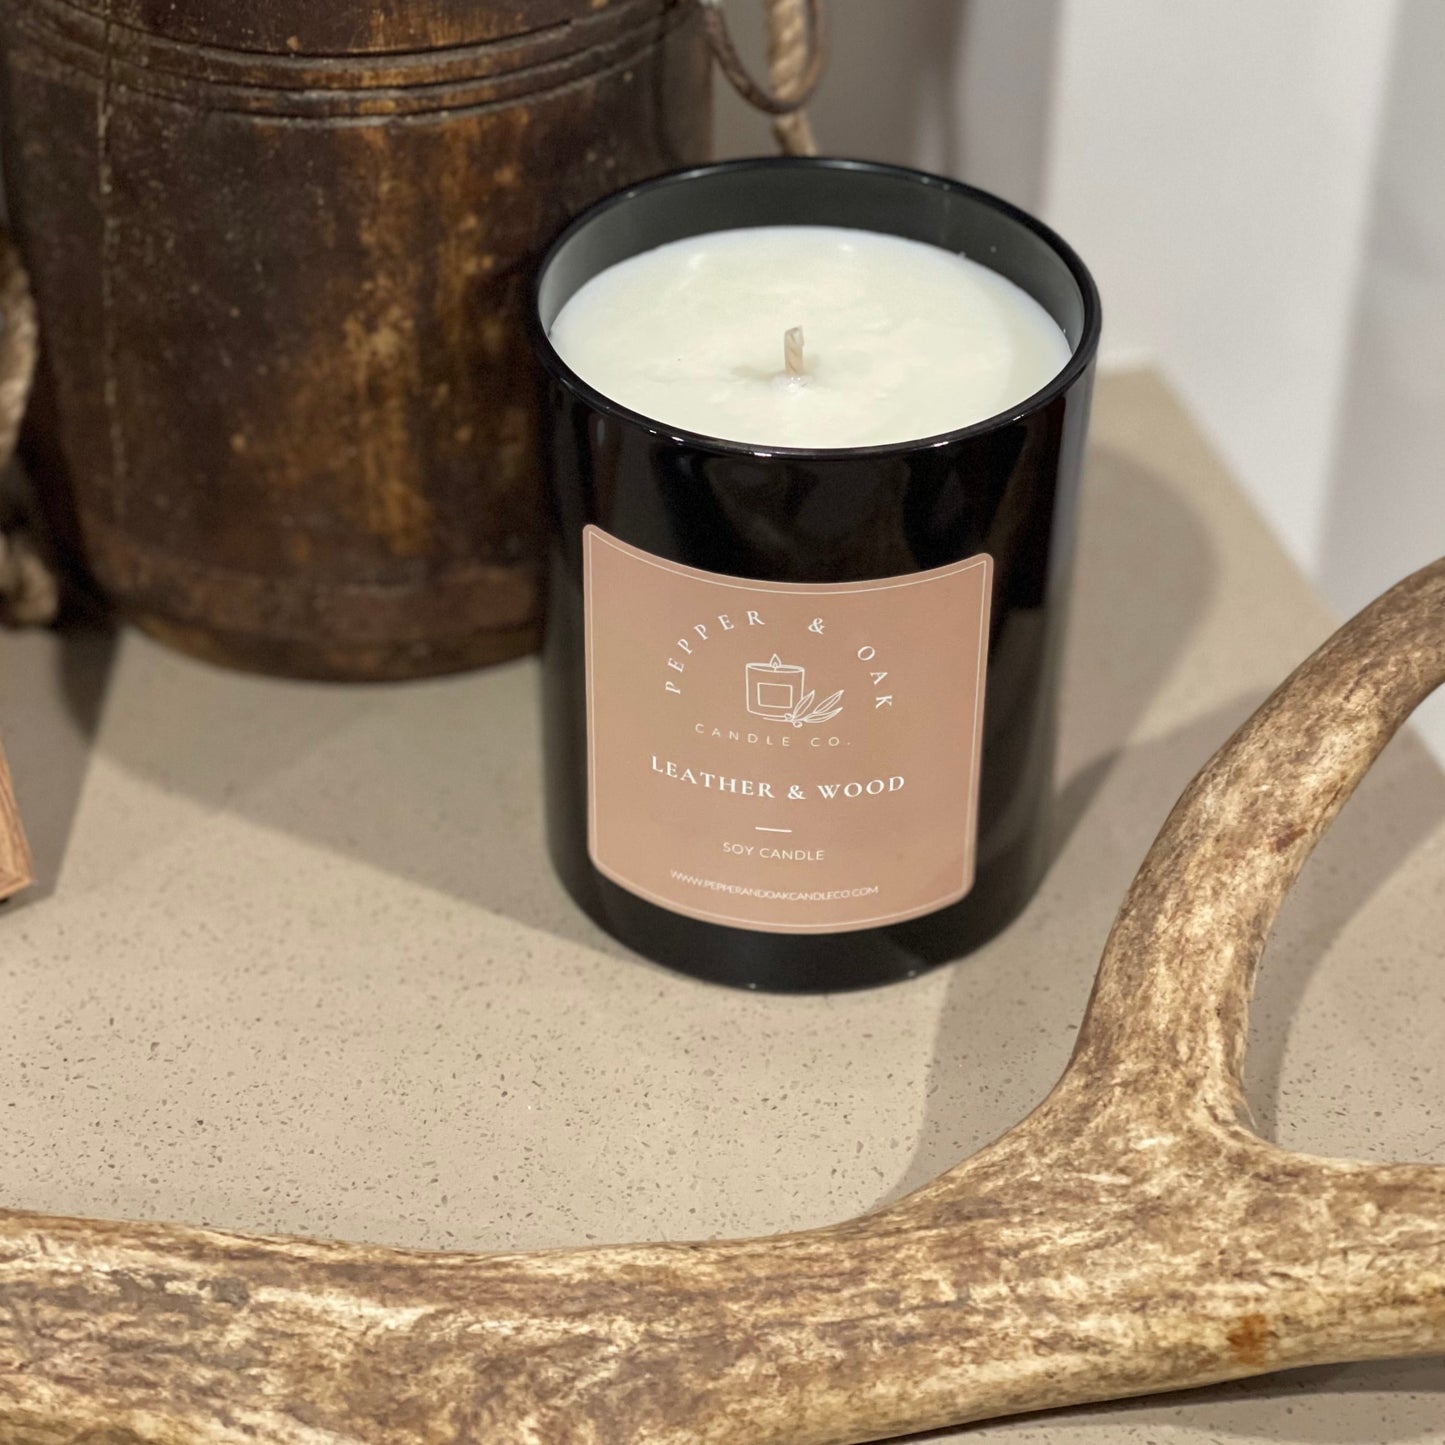 Leather & Wood Soy Candle